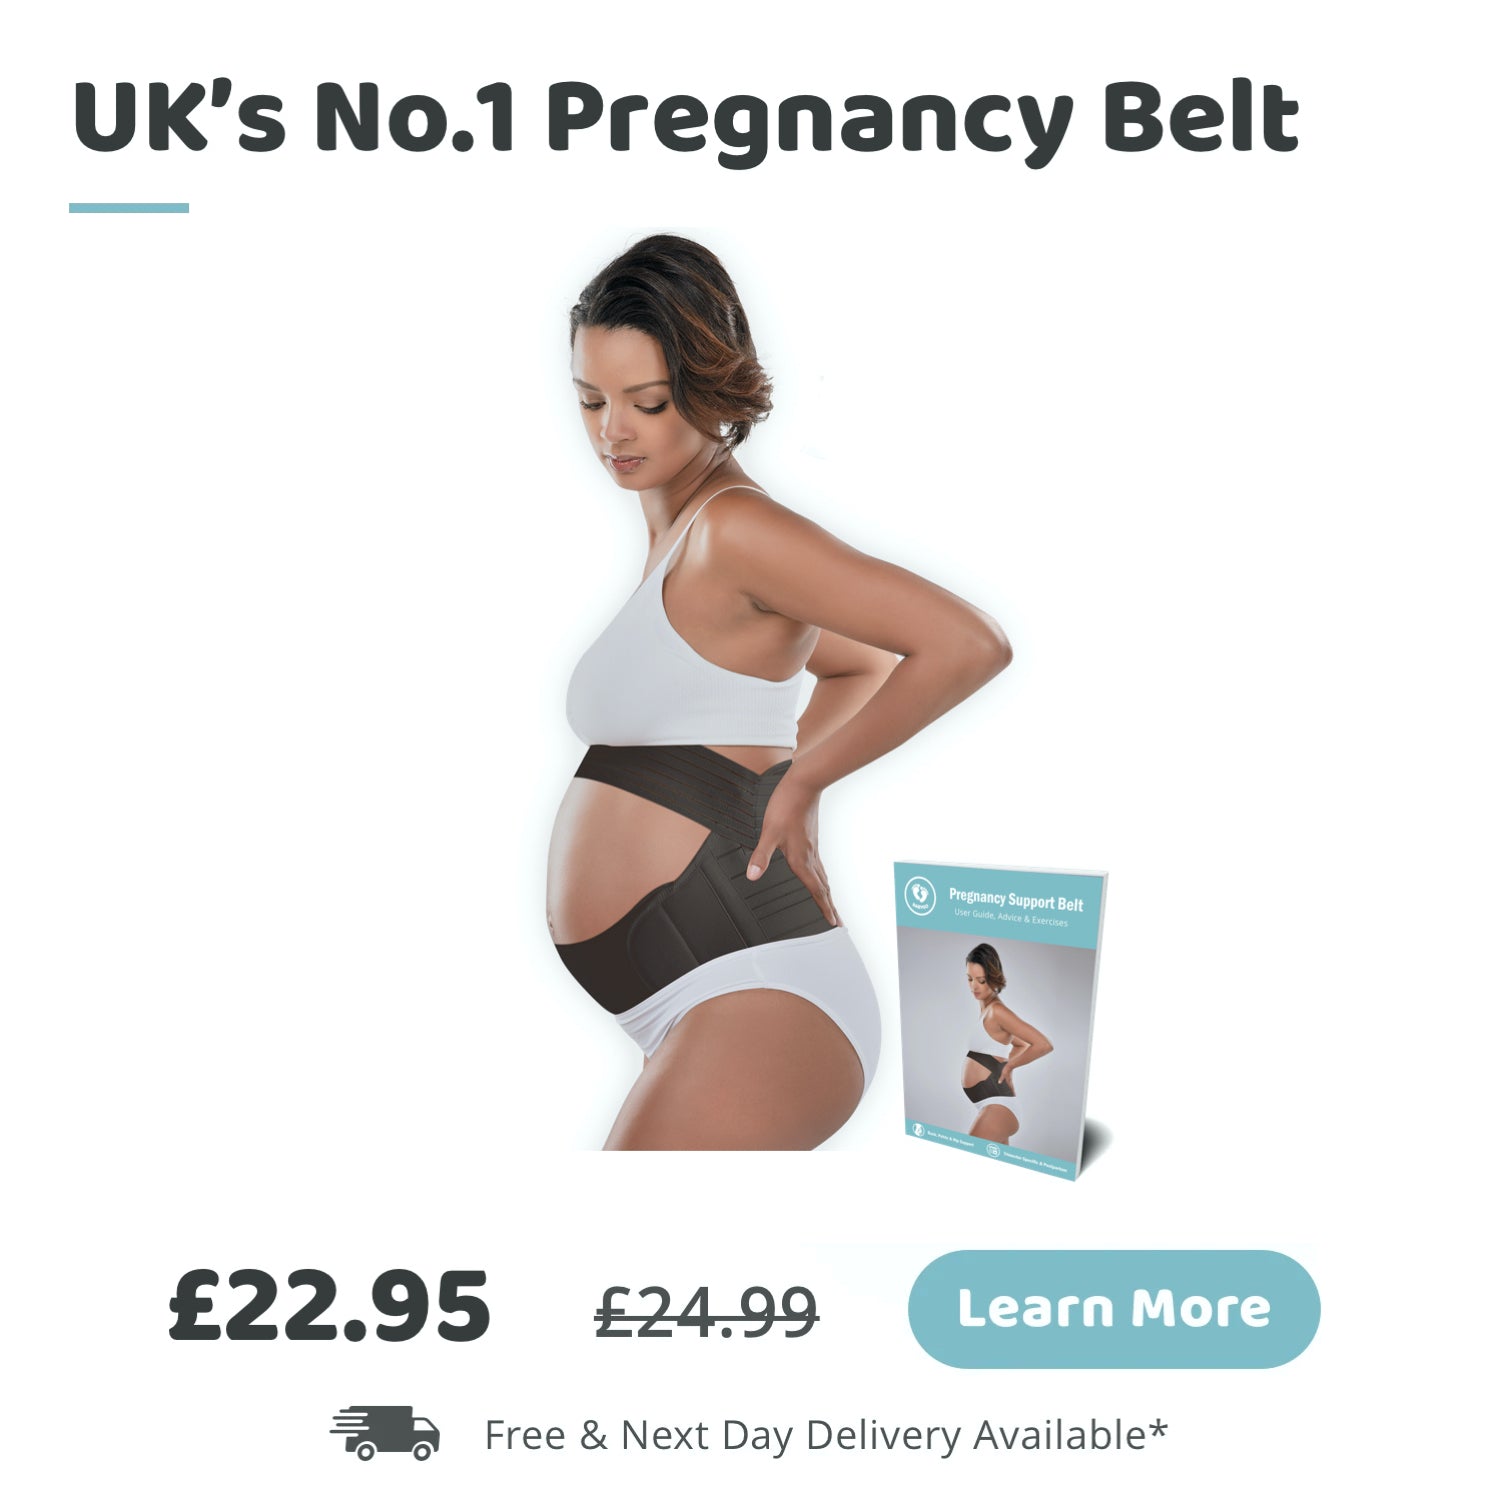 4 in 1 Pregnancy Support Belt Maternity & Postpartum Band - Relieve Back, Pelvic, Hip Pain, SPD & PGP >> inc Free 40 Page Pregnancy Book for Birth Preparation, Labour & Recovery